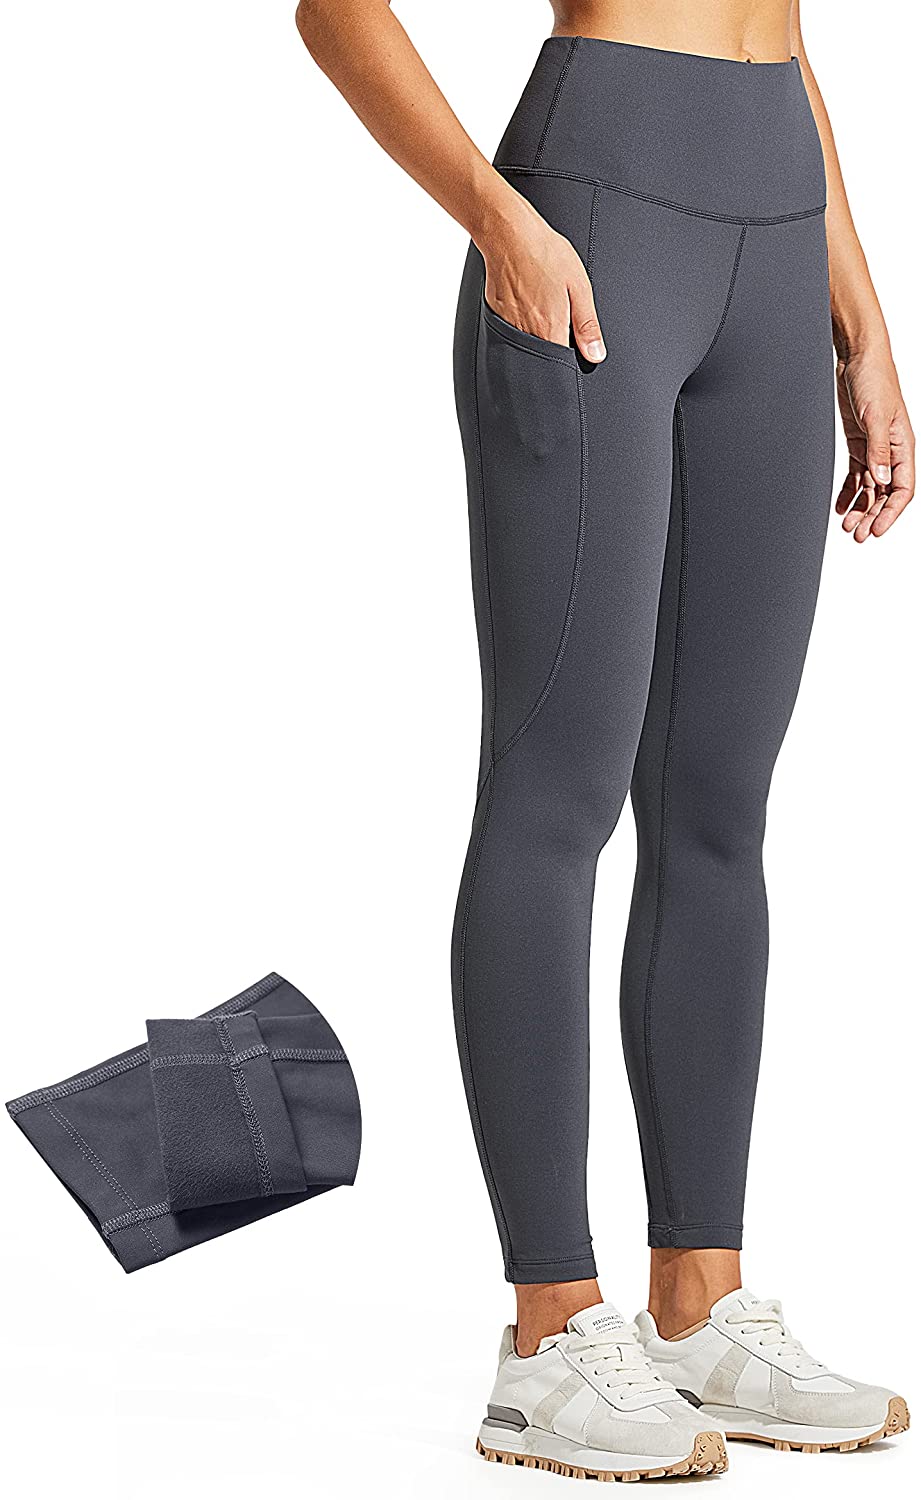 Our Point of View on ZUTY Women's High Wasted Yoga Leggings From  